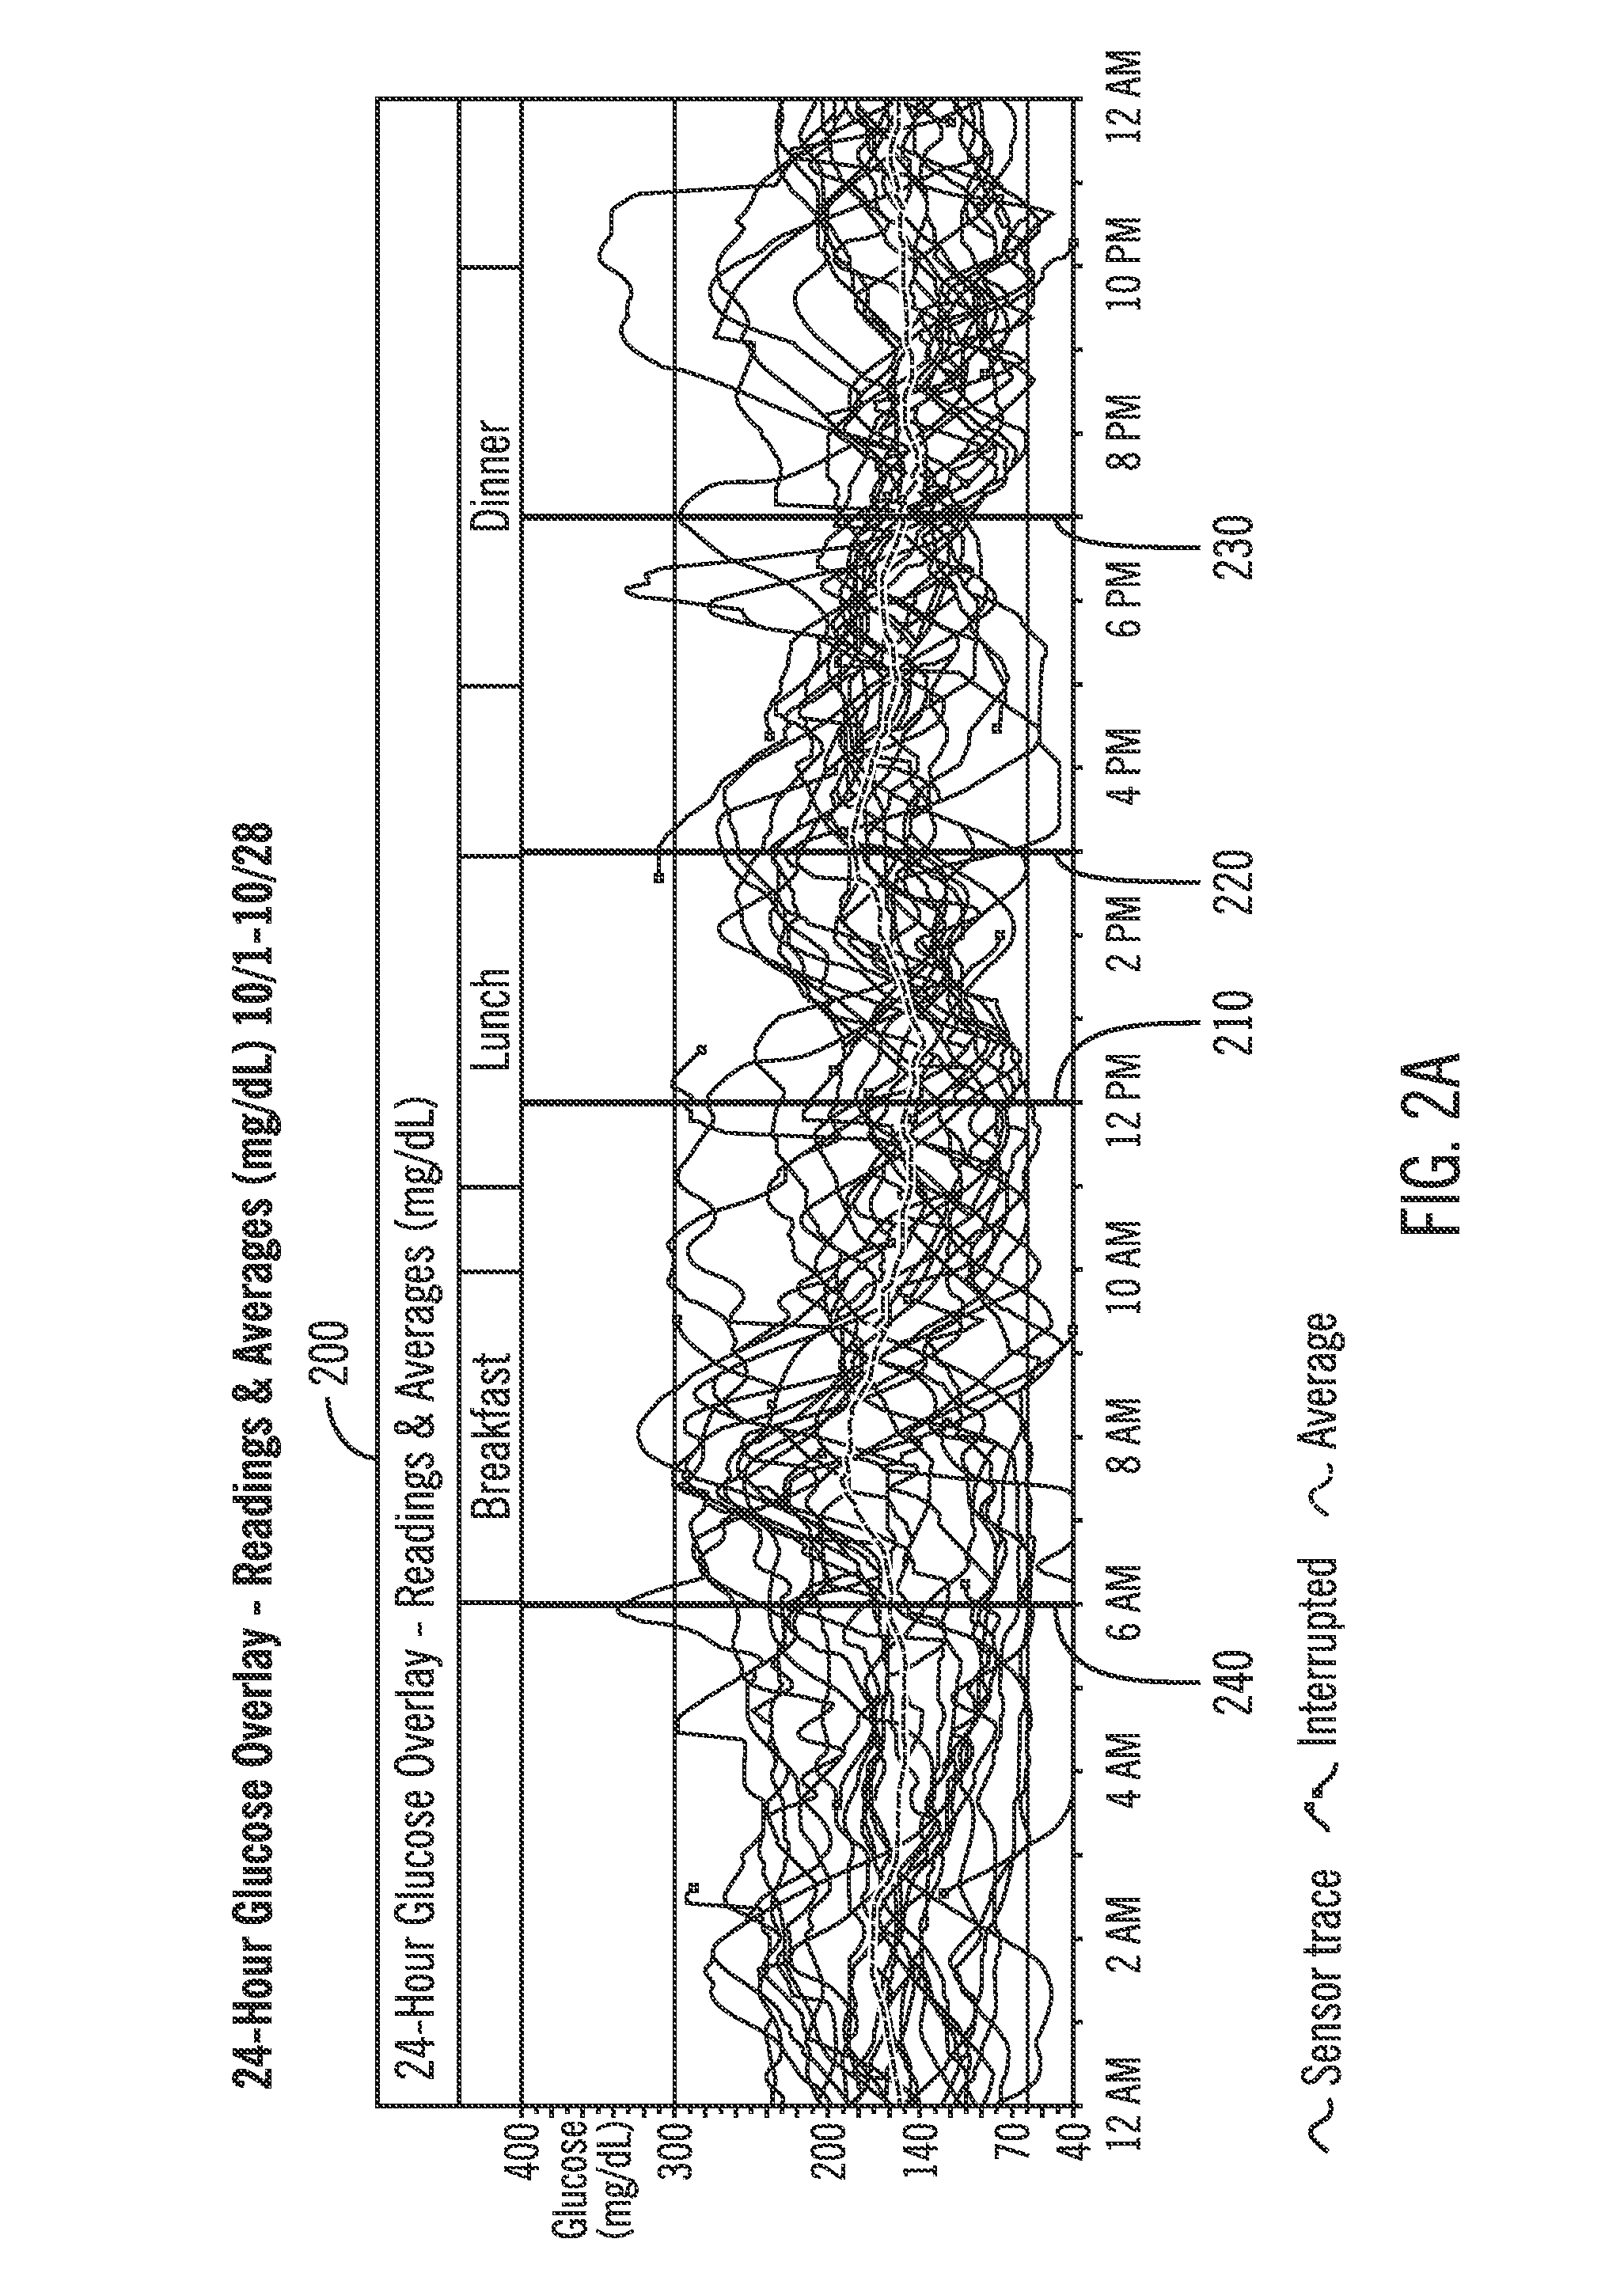 Diabetes therapy management system for recommending adjustments to an insulin infusion device